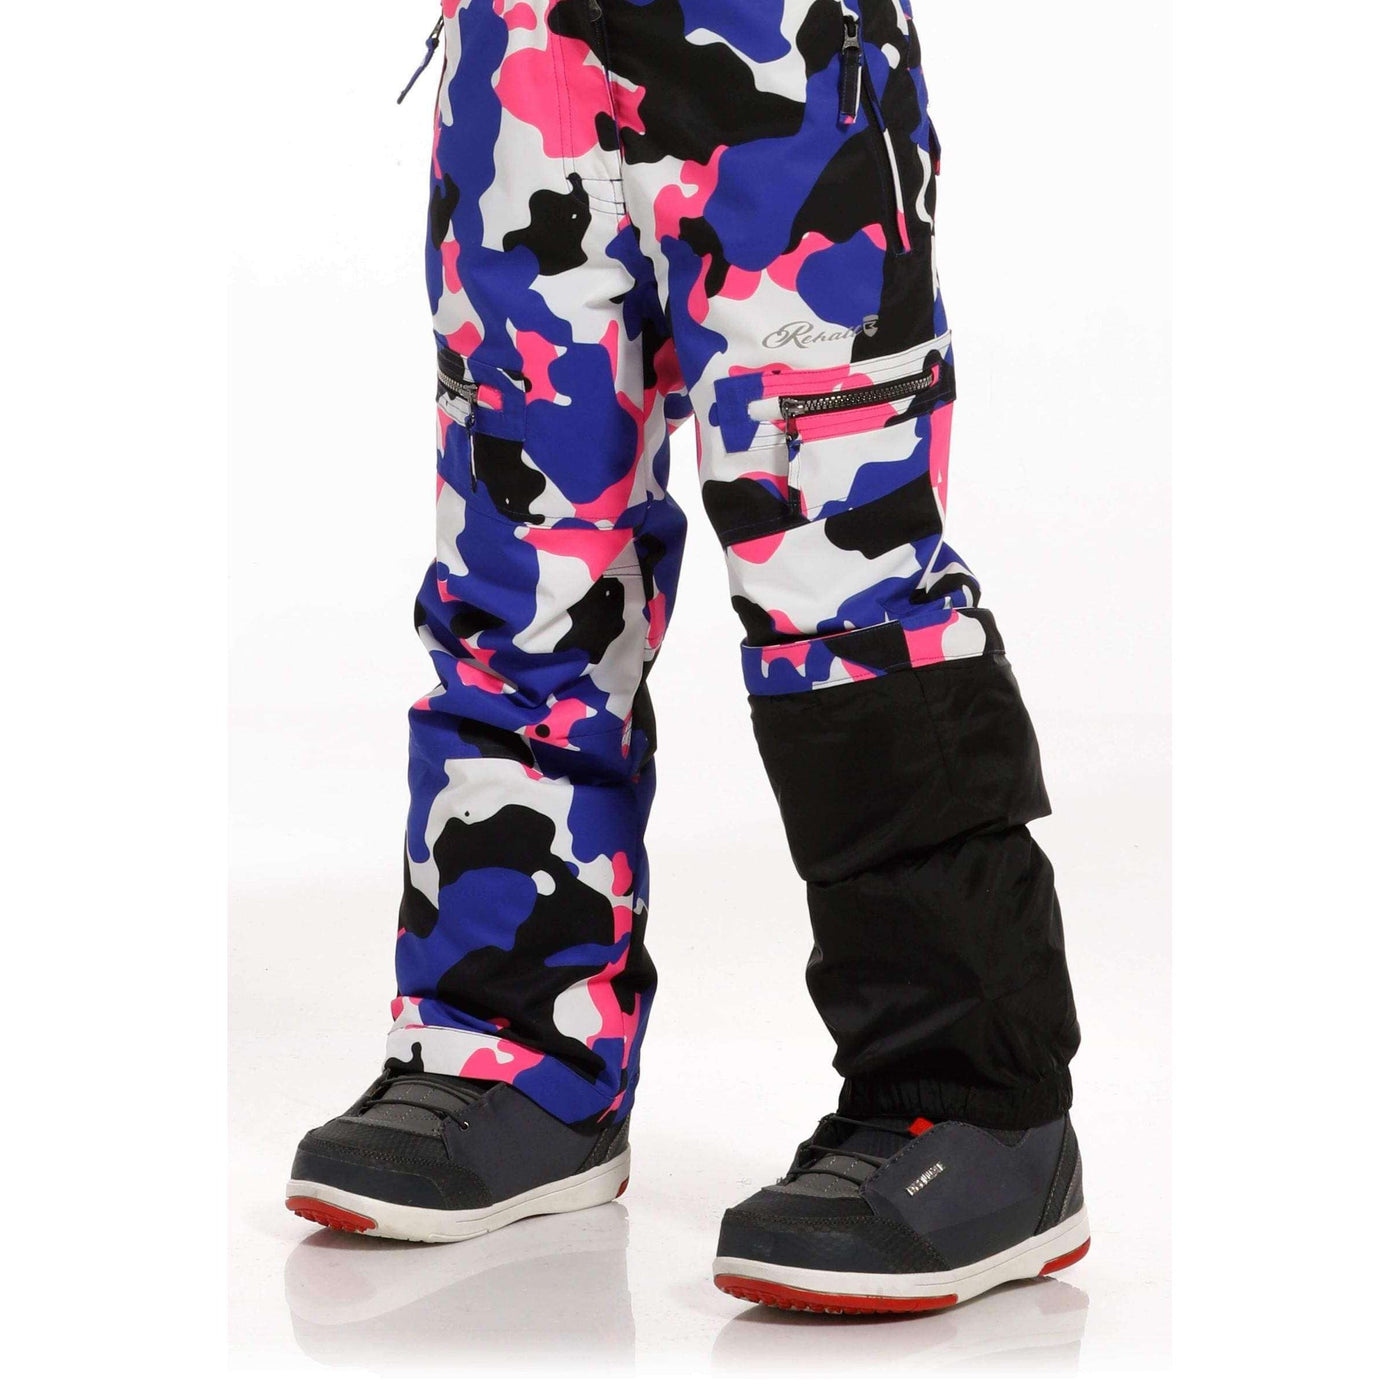 Rehall Outerwear Pants Rehall Keely Girls Snow Pants - Camo Pink